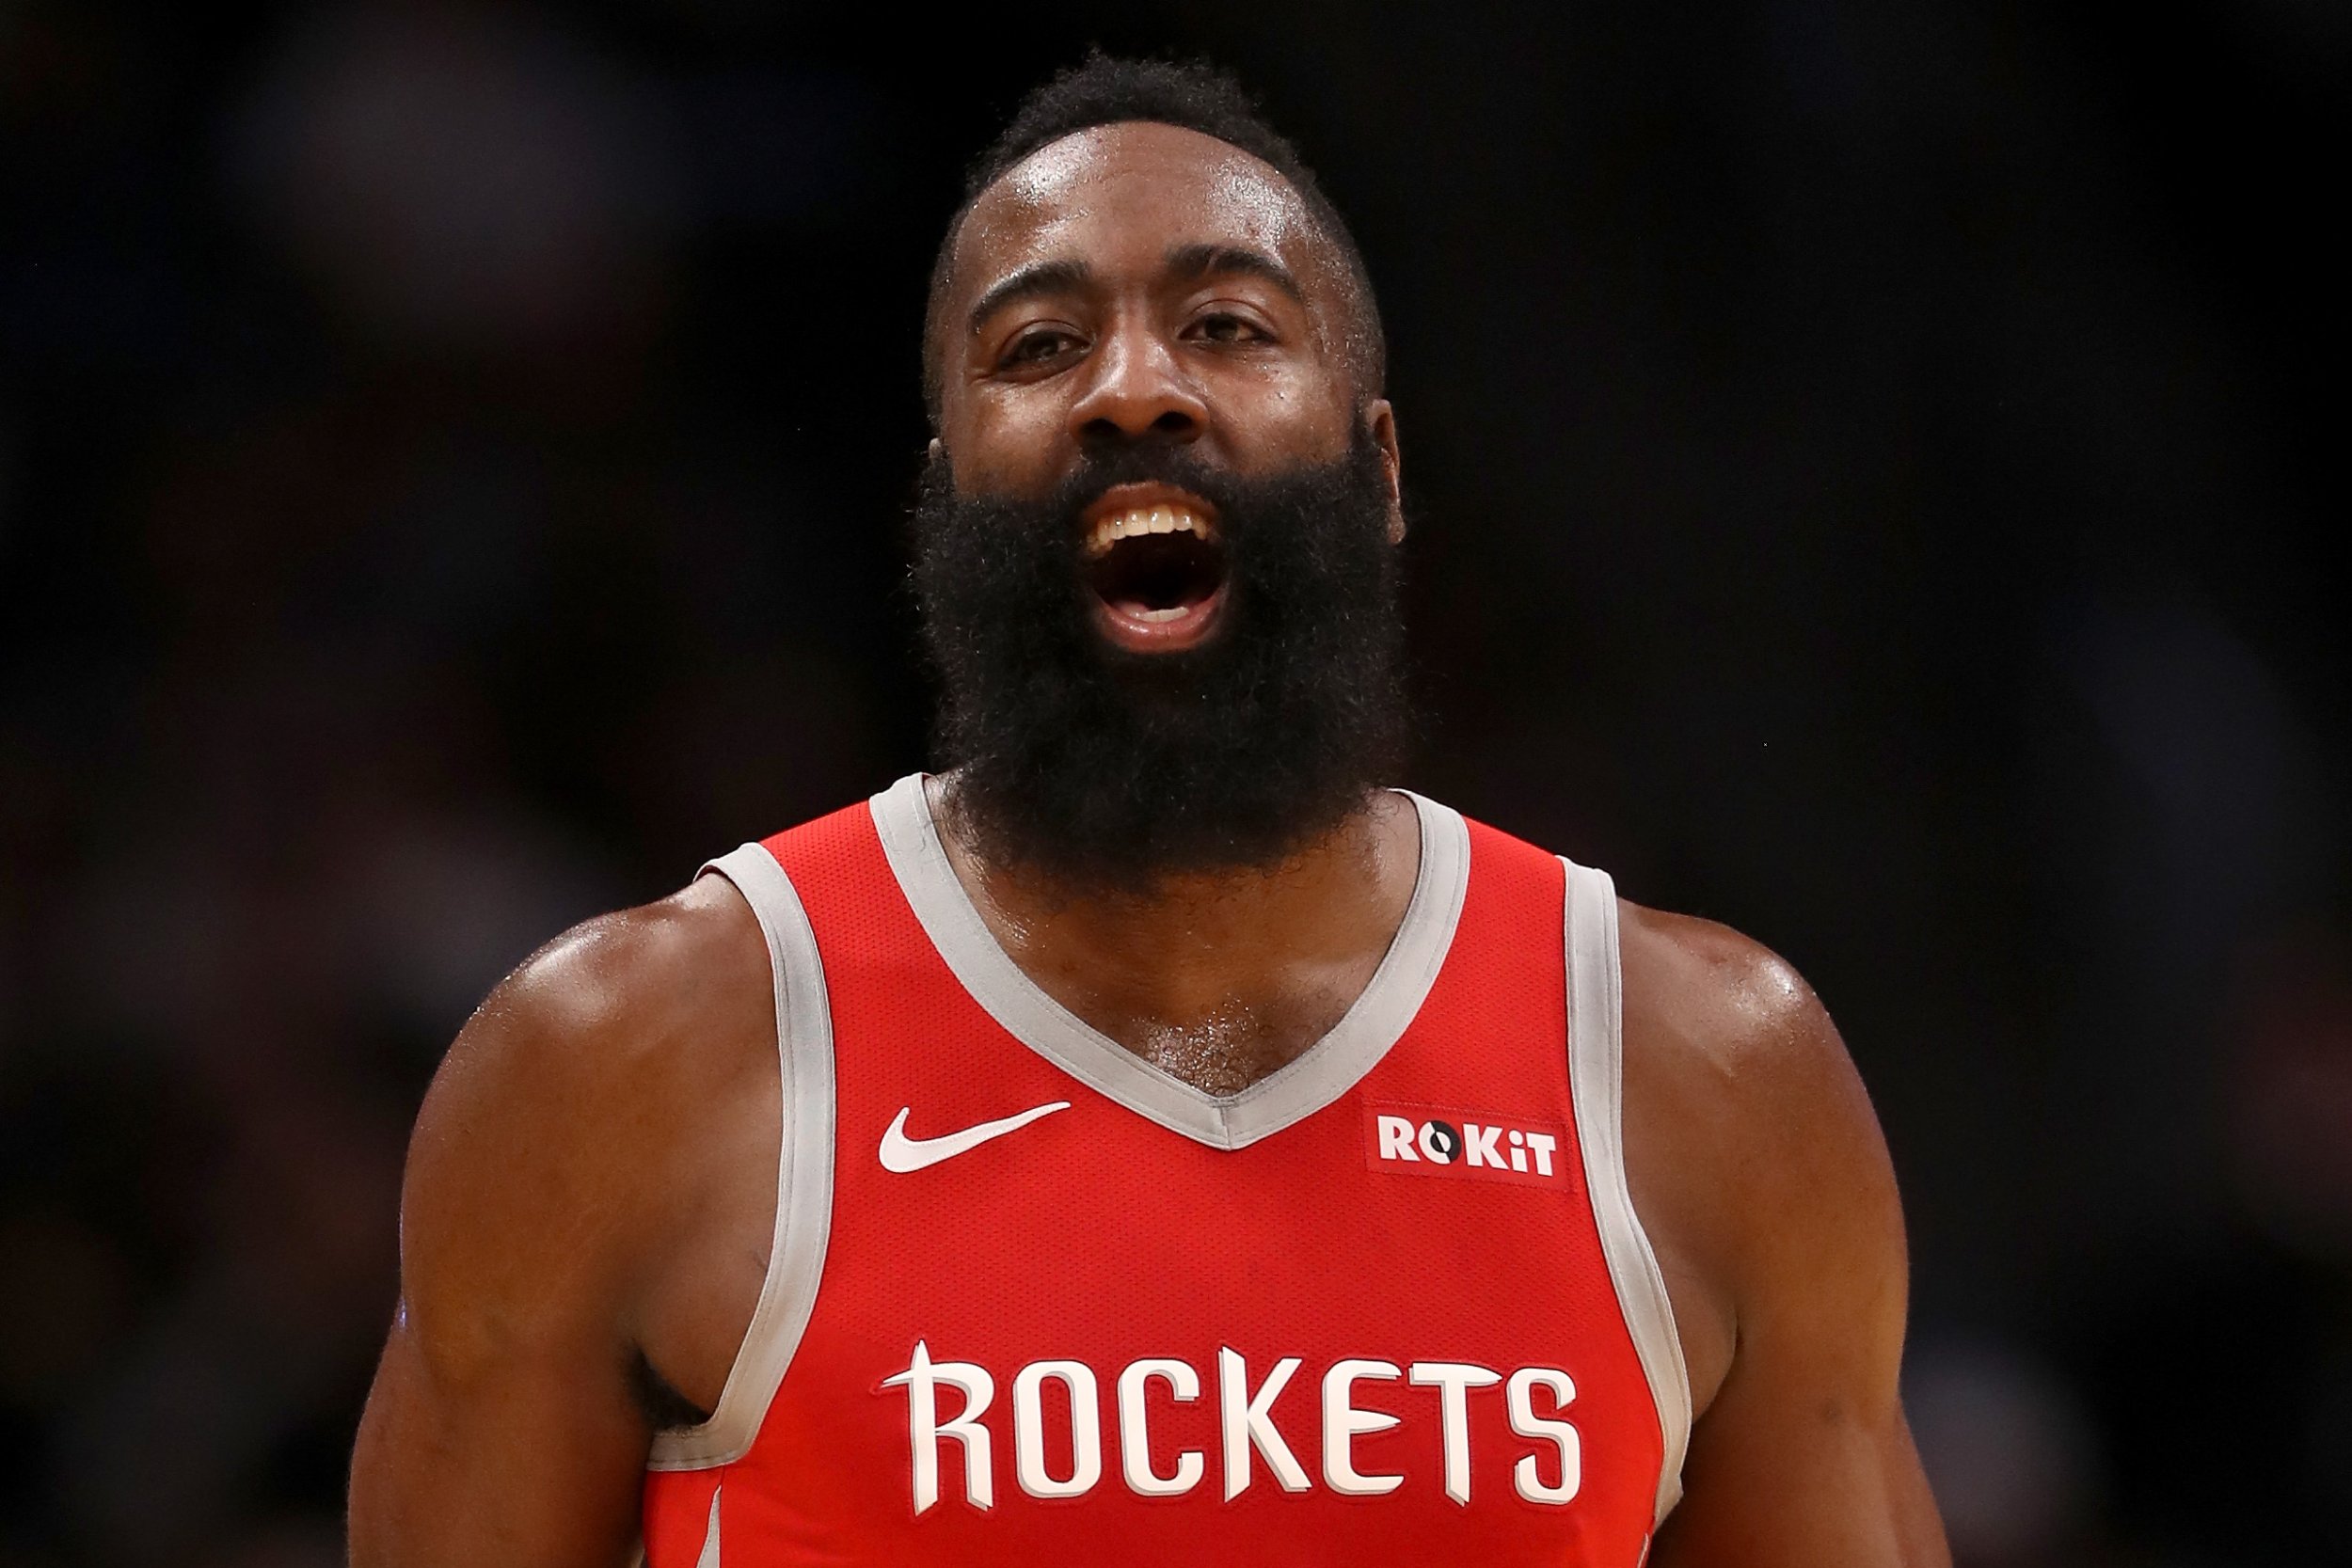 Nba James Harden Russell Westbrook Called Sex Slaves By Ex Nfl Star Free Download Nude Photo